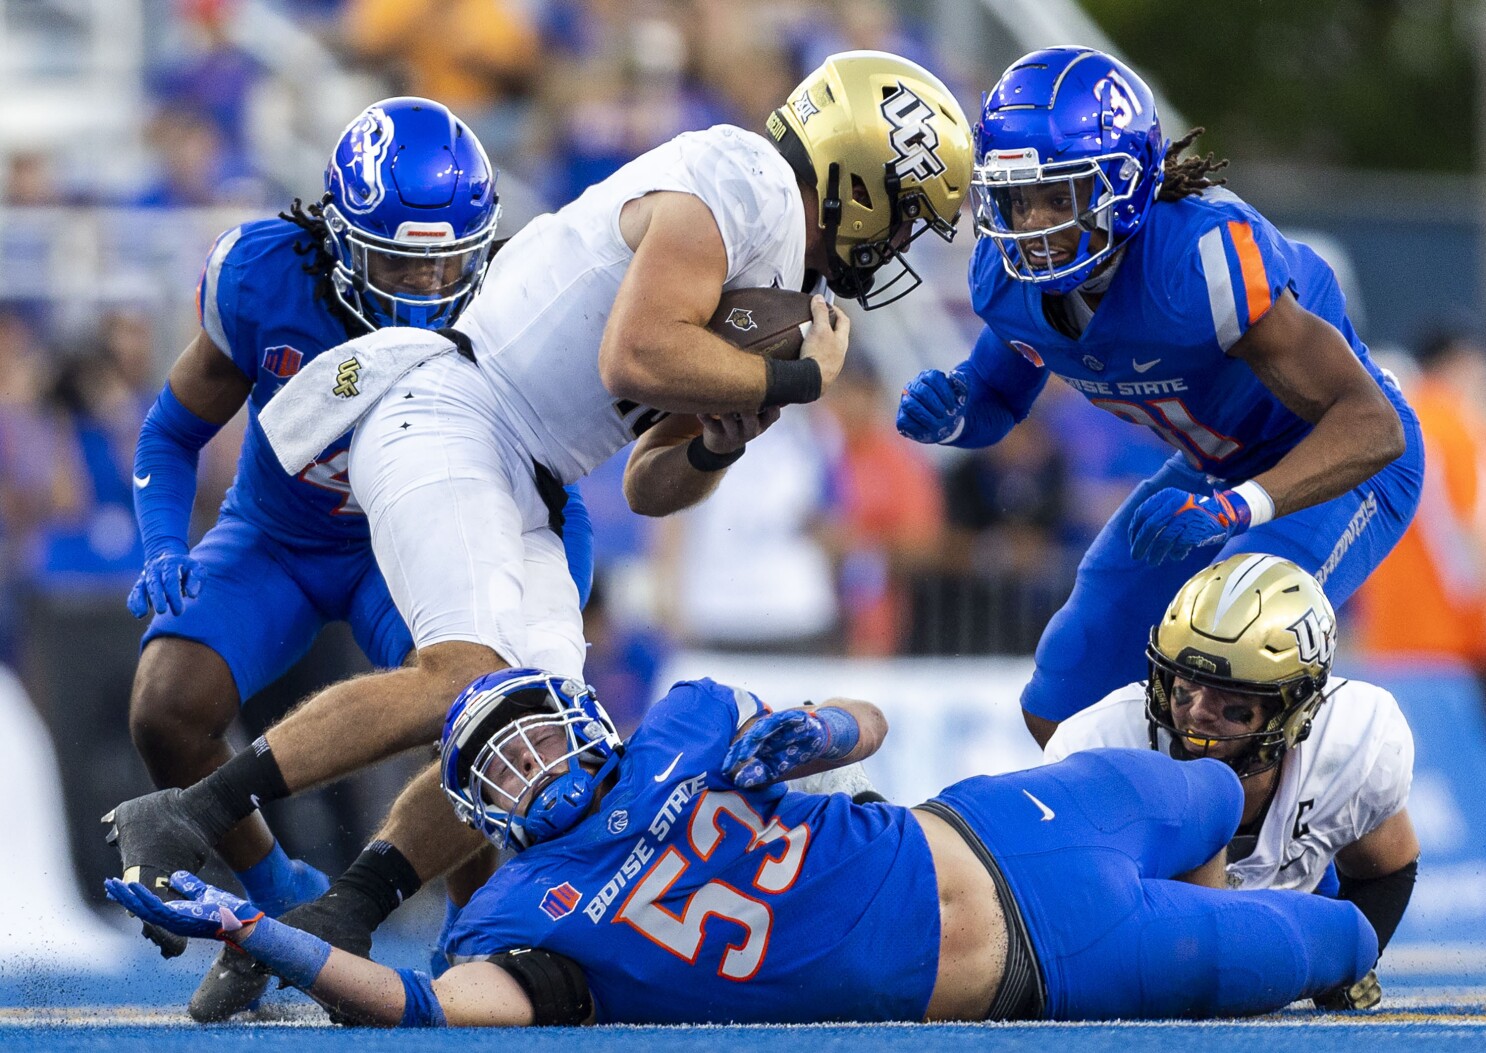 Boise State unable to hang on after late touchdown, as UCF walks